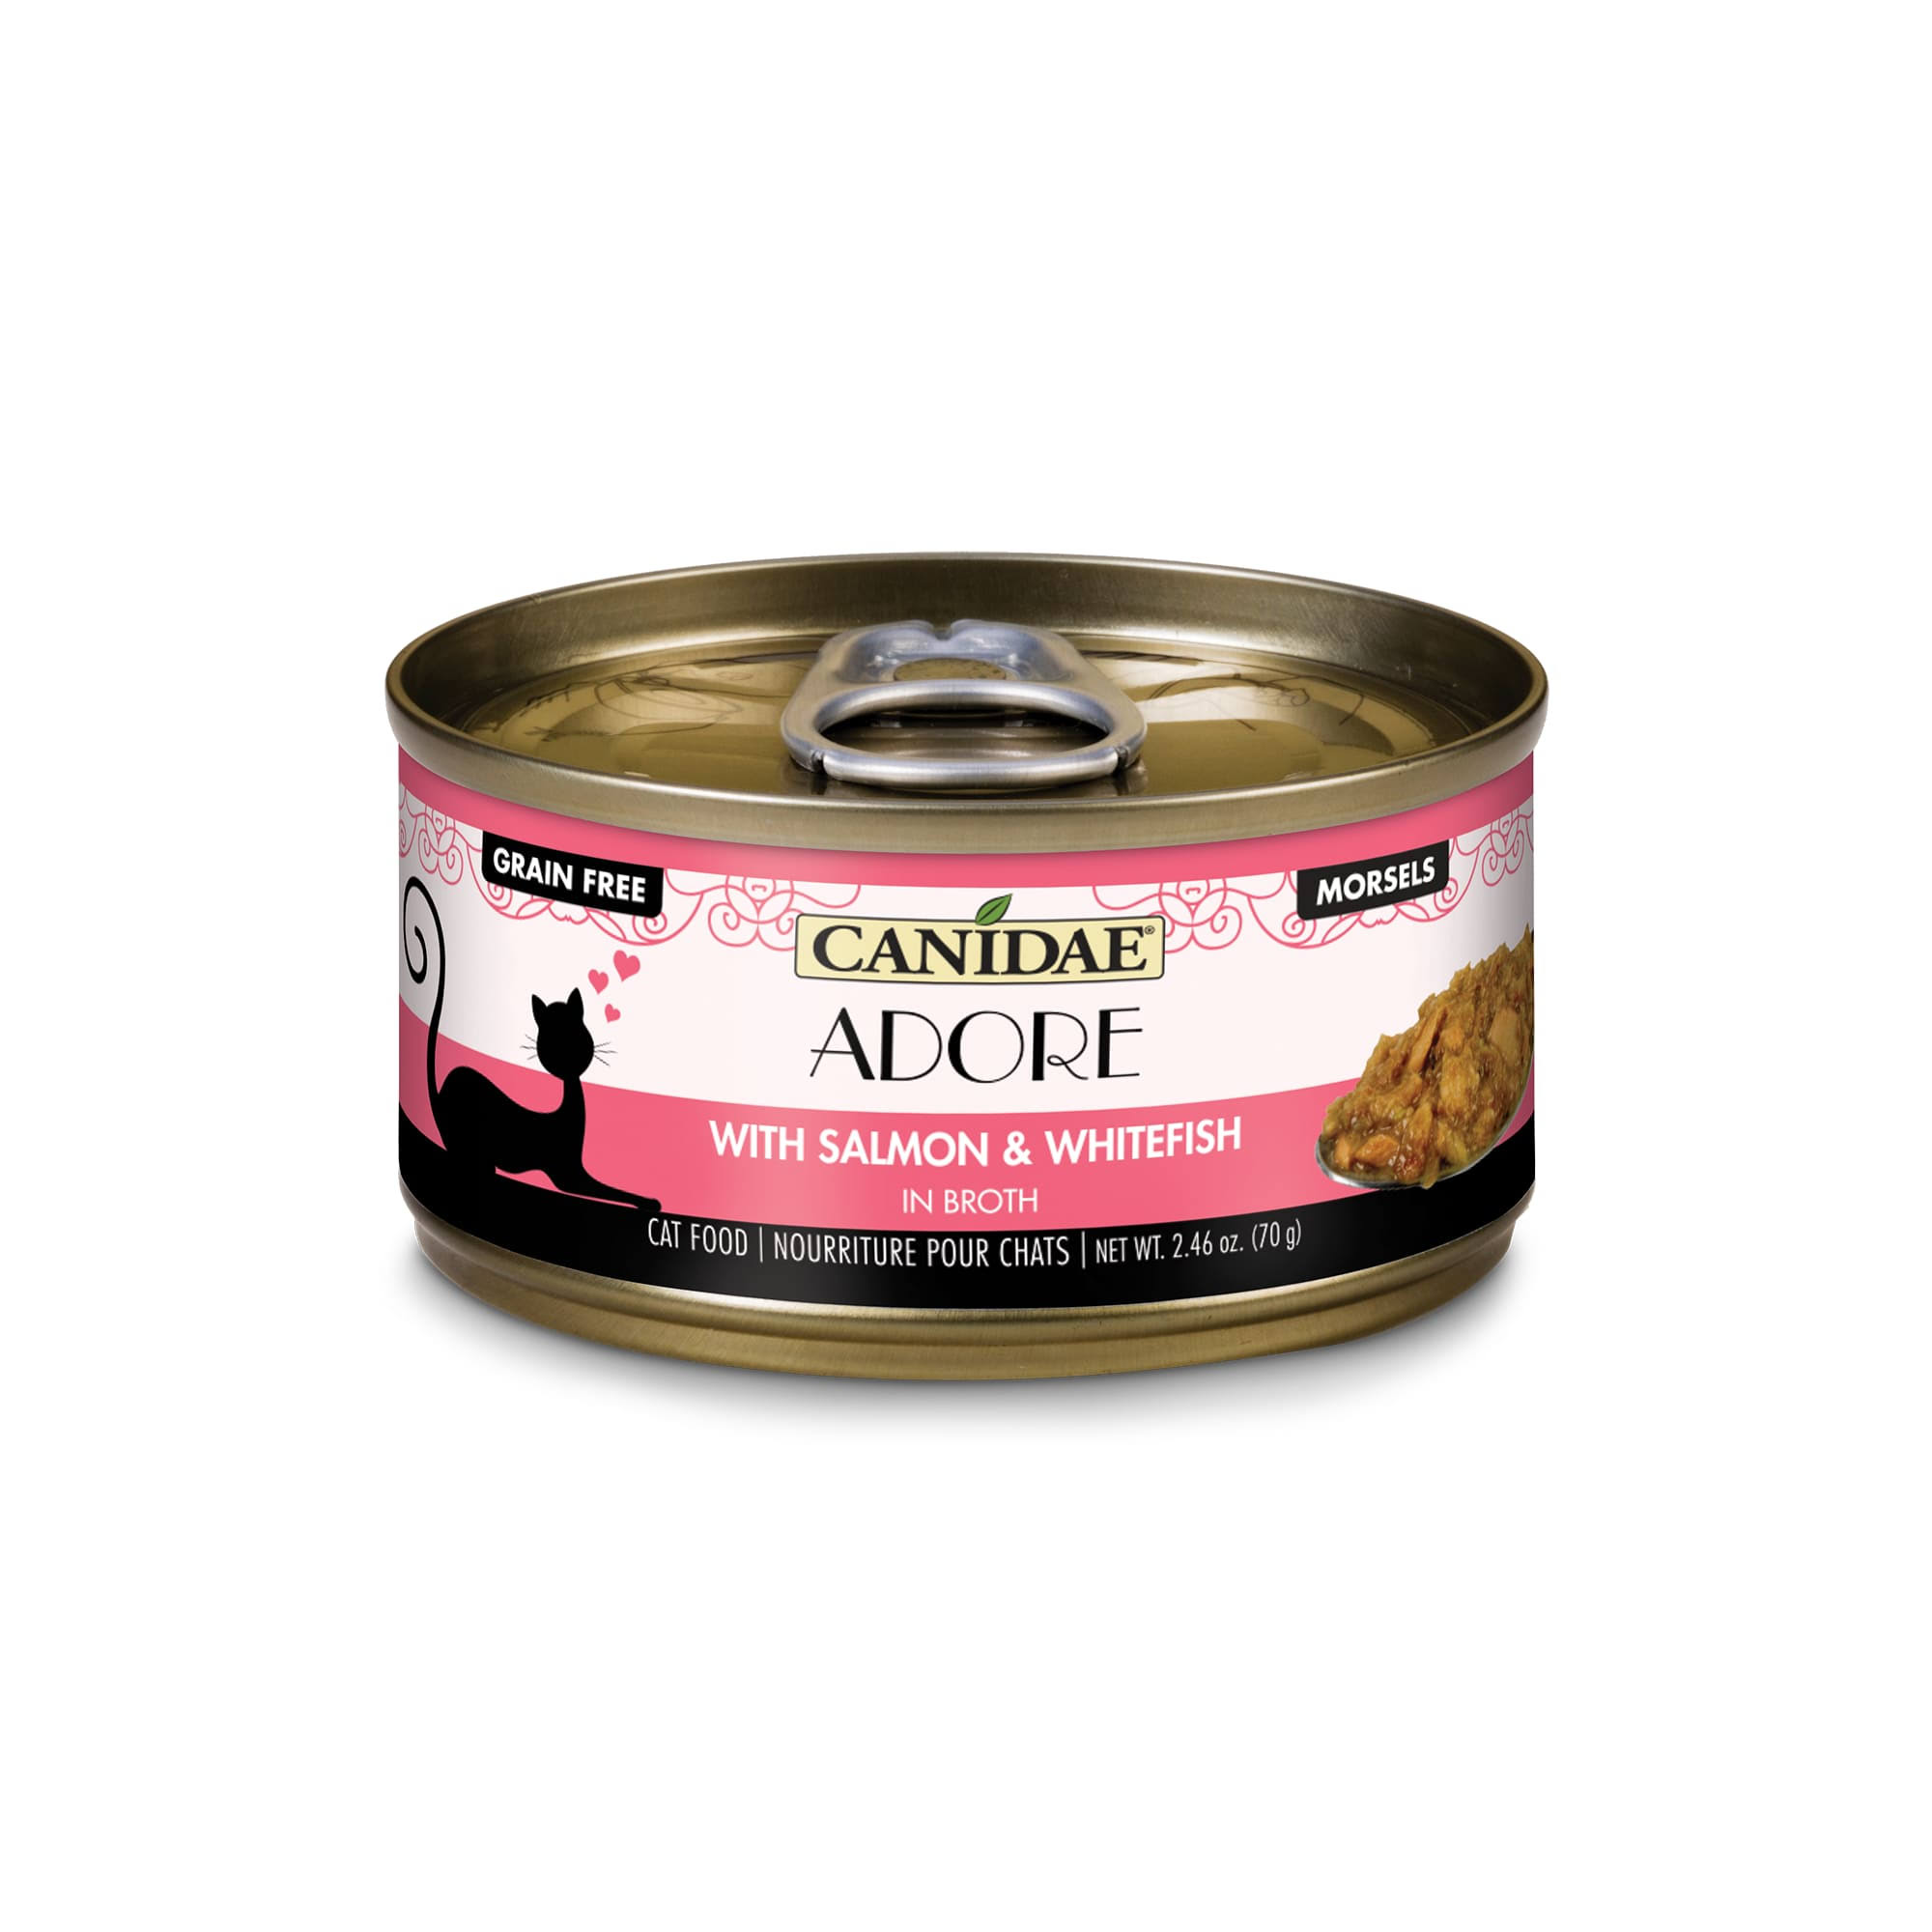 Canidae ADR Salmon & Whitefish in Broth Cat Food - 2.46 oz